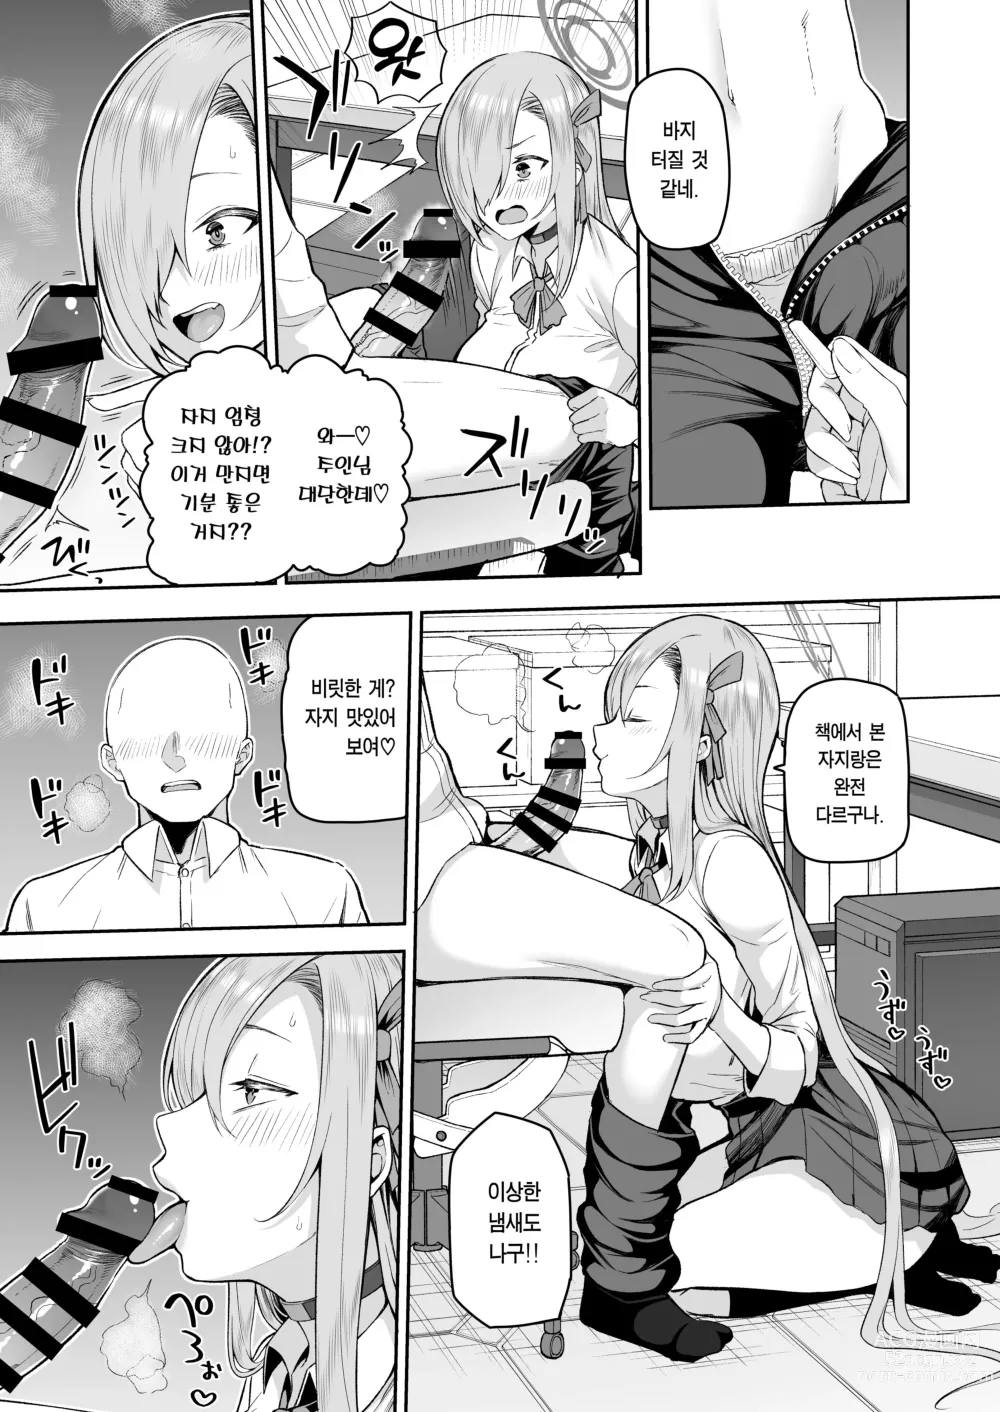 Page 7 of doujinshi 알려줘